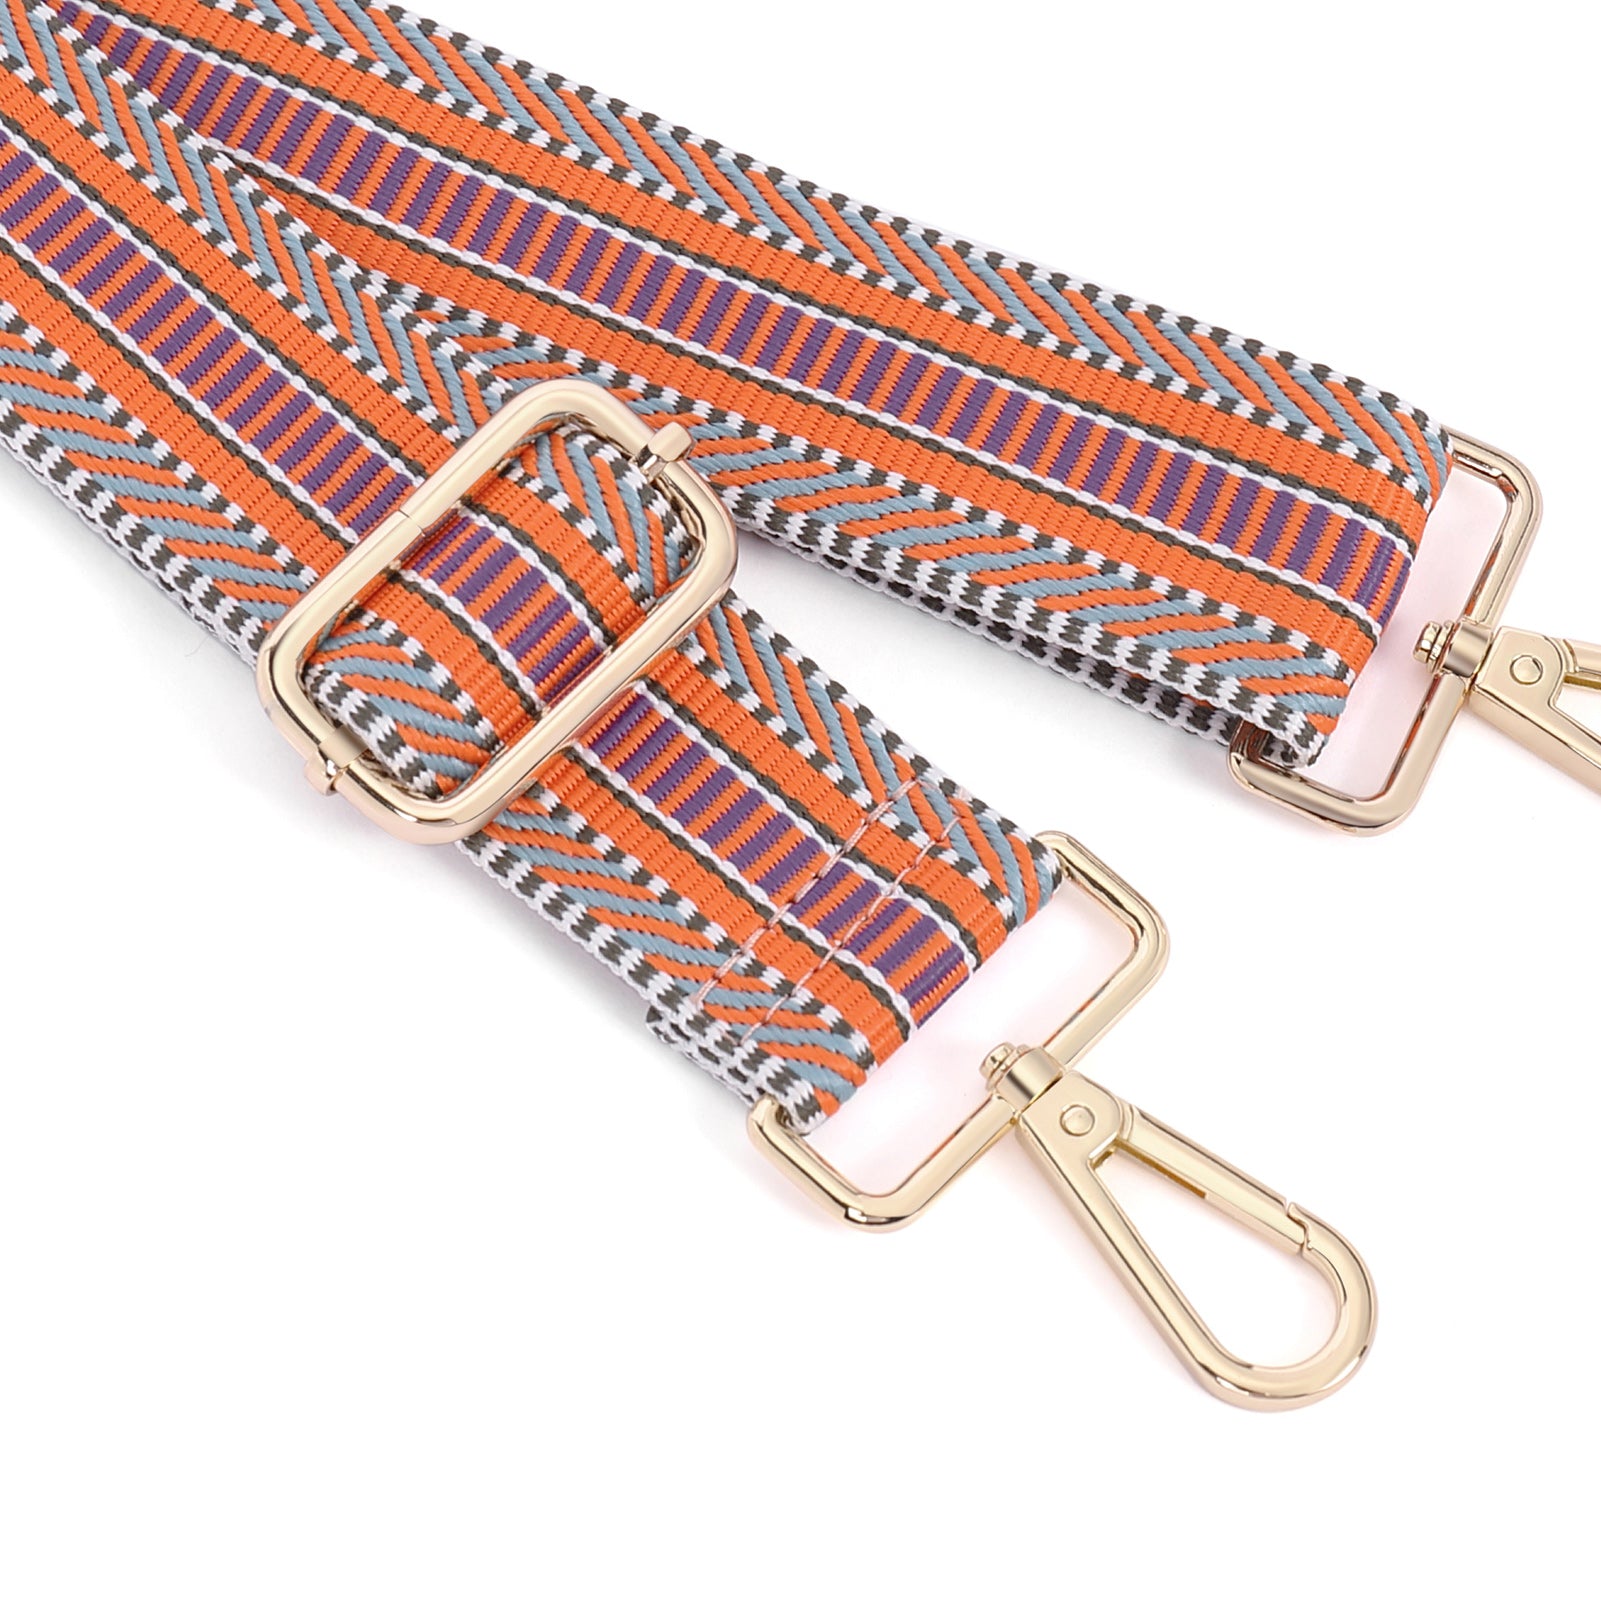 Wide Purse Straps Replacement Crossbody - Colorful Belt with Buckle Strap  Adjustable Strap with Buckle Metal Strap Hooks Purse Bag - Cross Body Strap